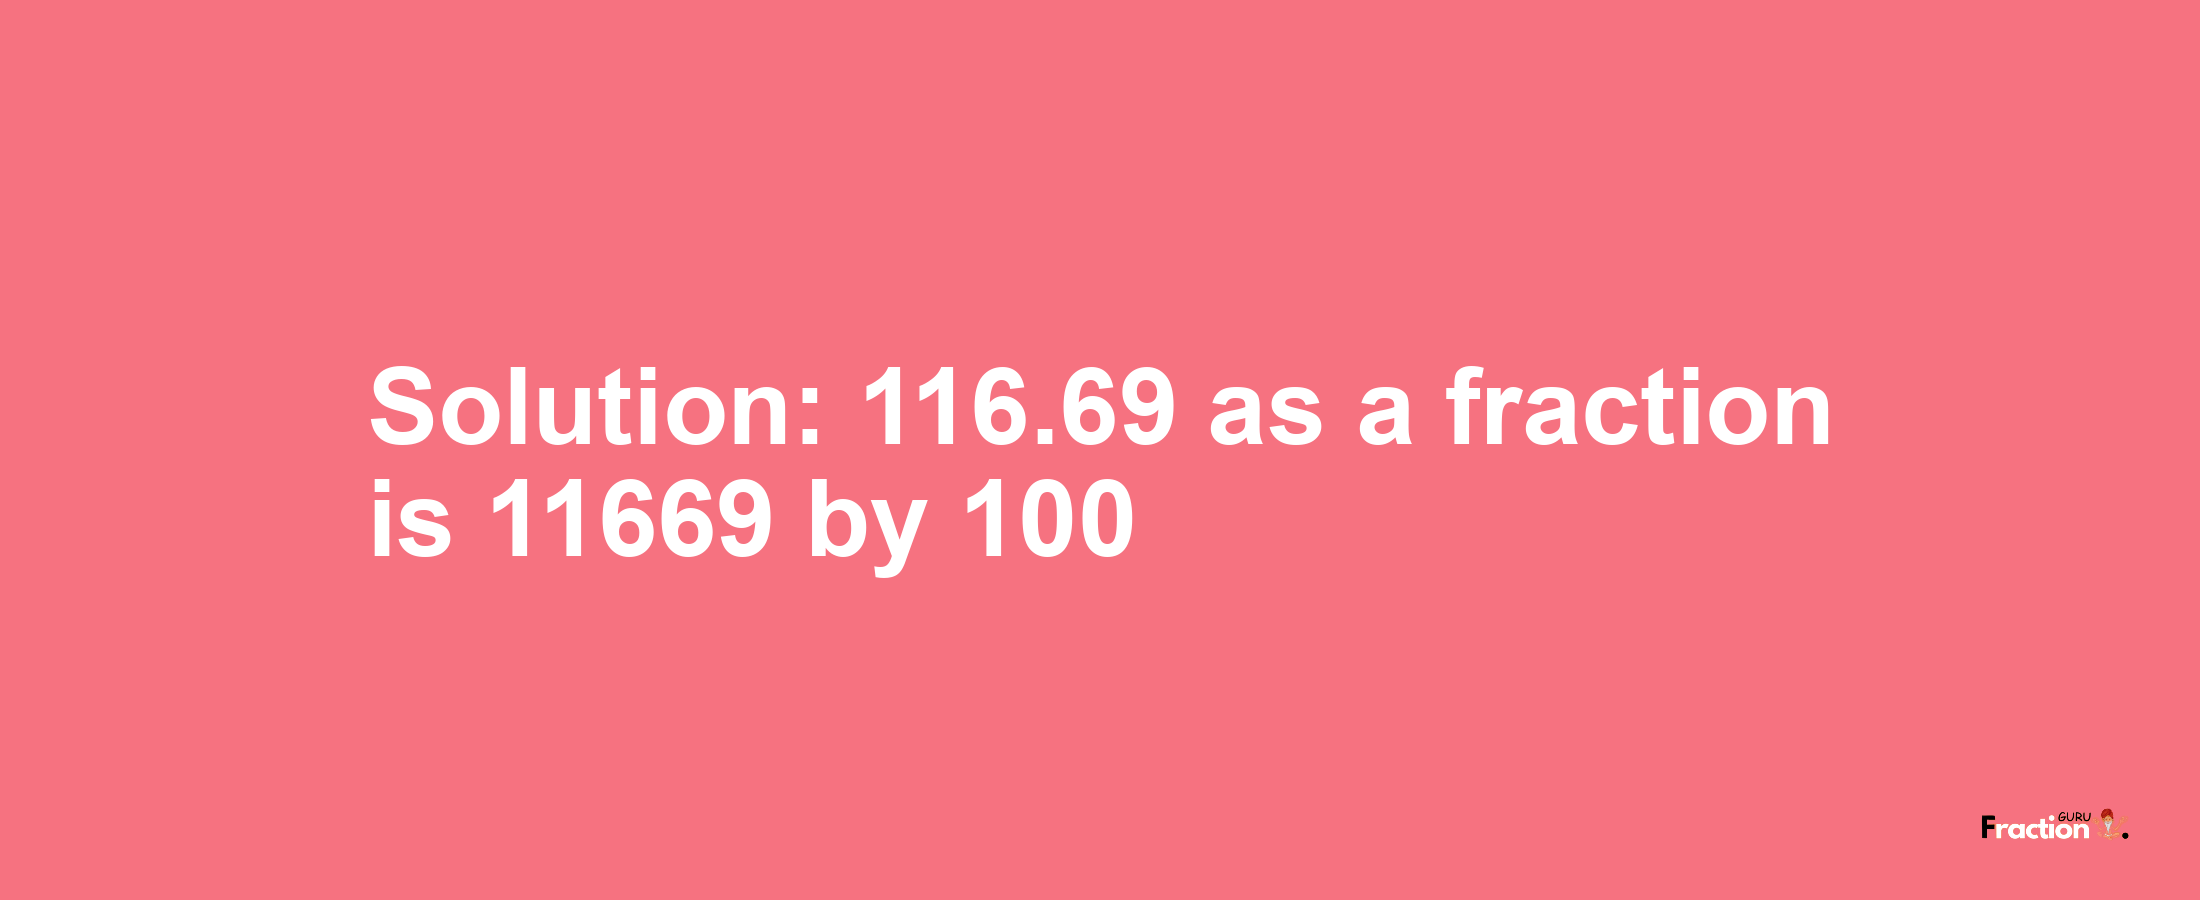 Solution:116.69 as a fraction is 11669/100